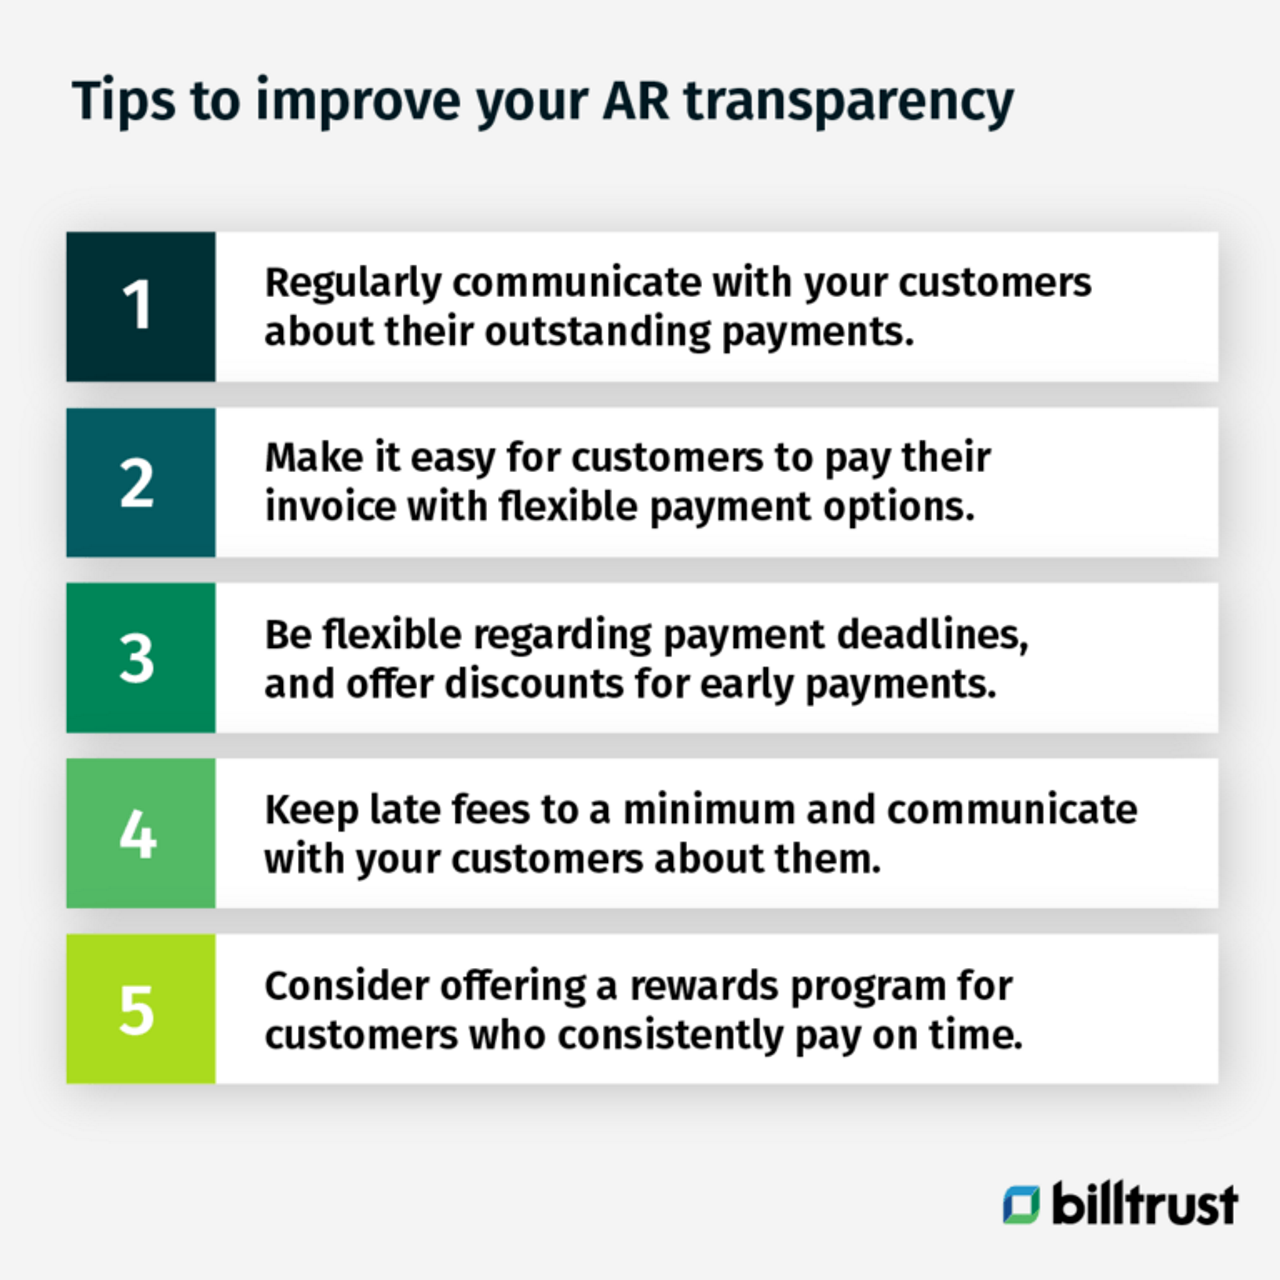 tips to improve your AR transparency graphic